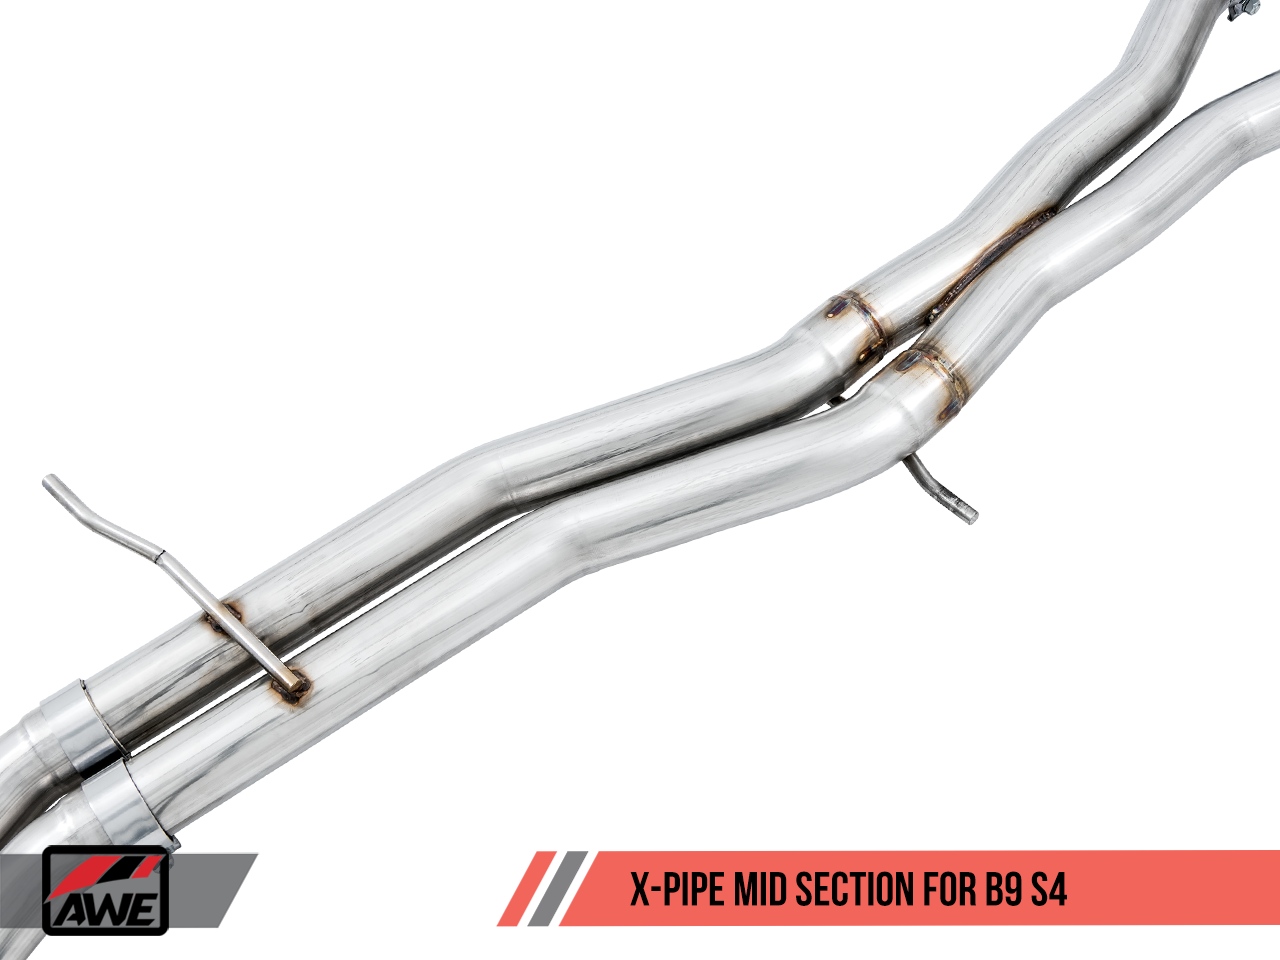 AWE Touring Edition Exhaust for B9 S4 - Resonated for Performance Catalyst - Motorsports LA